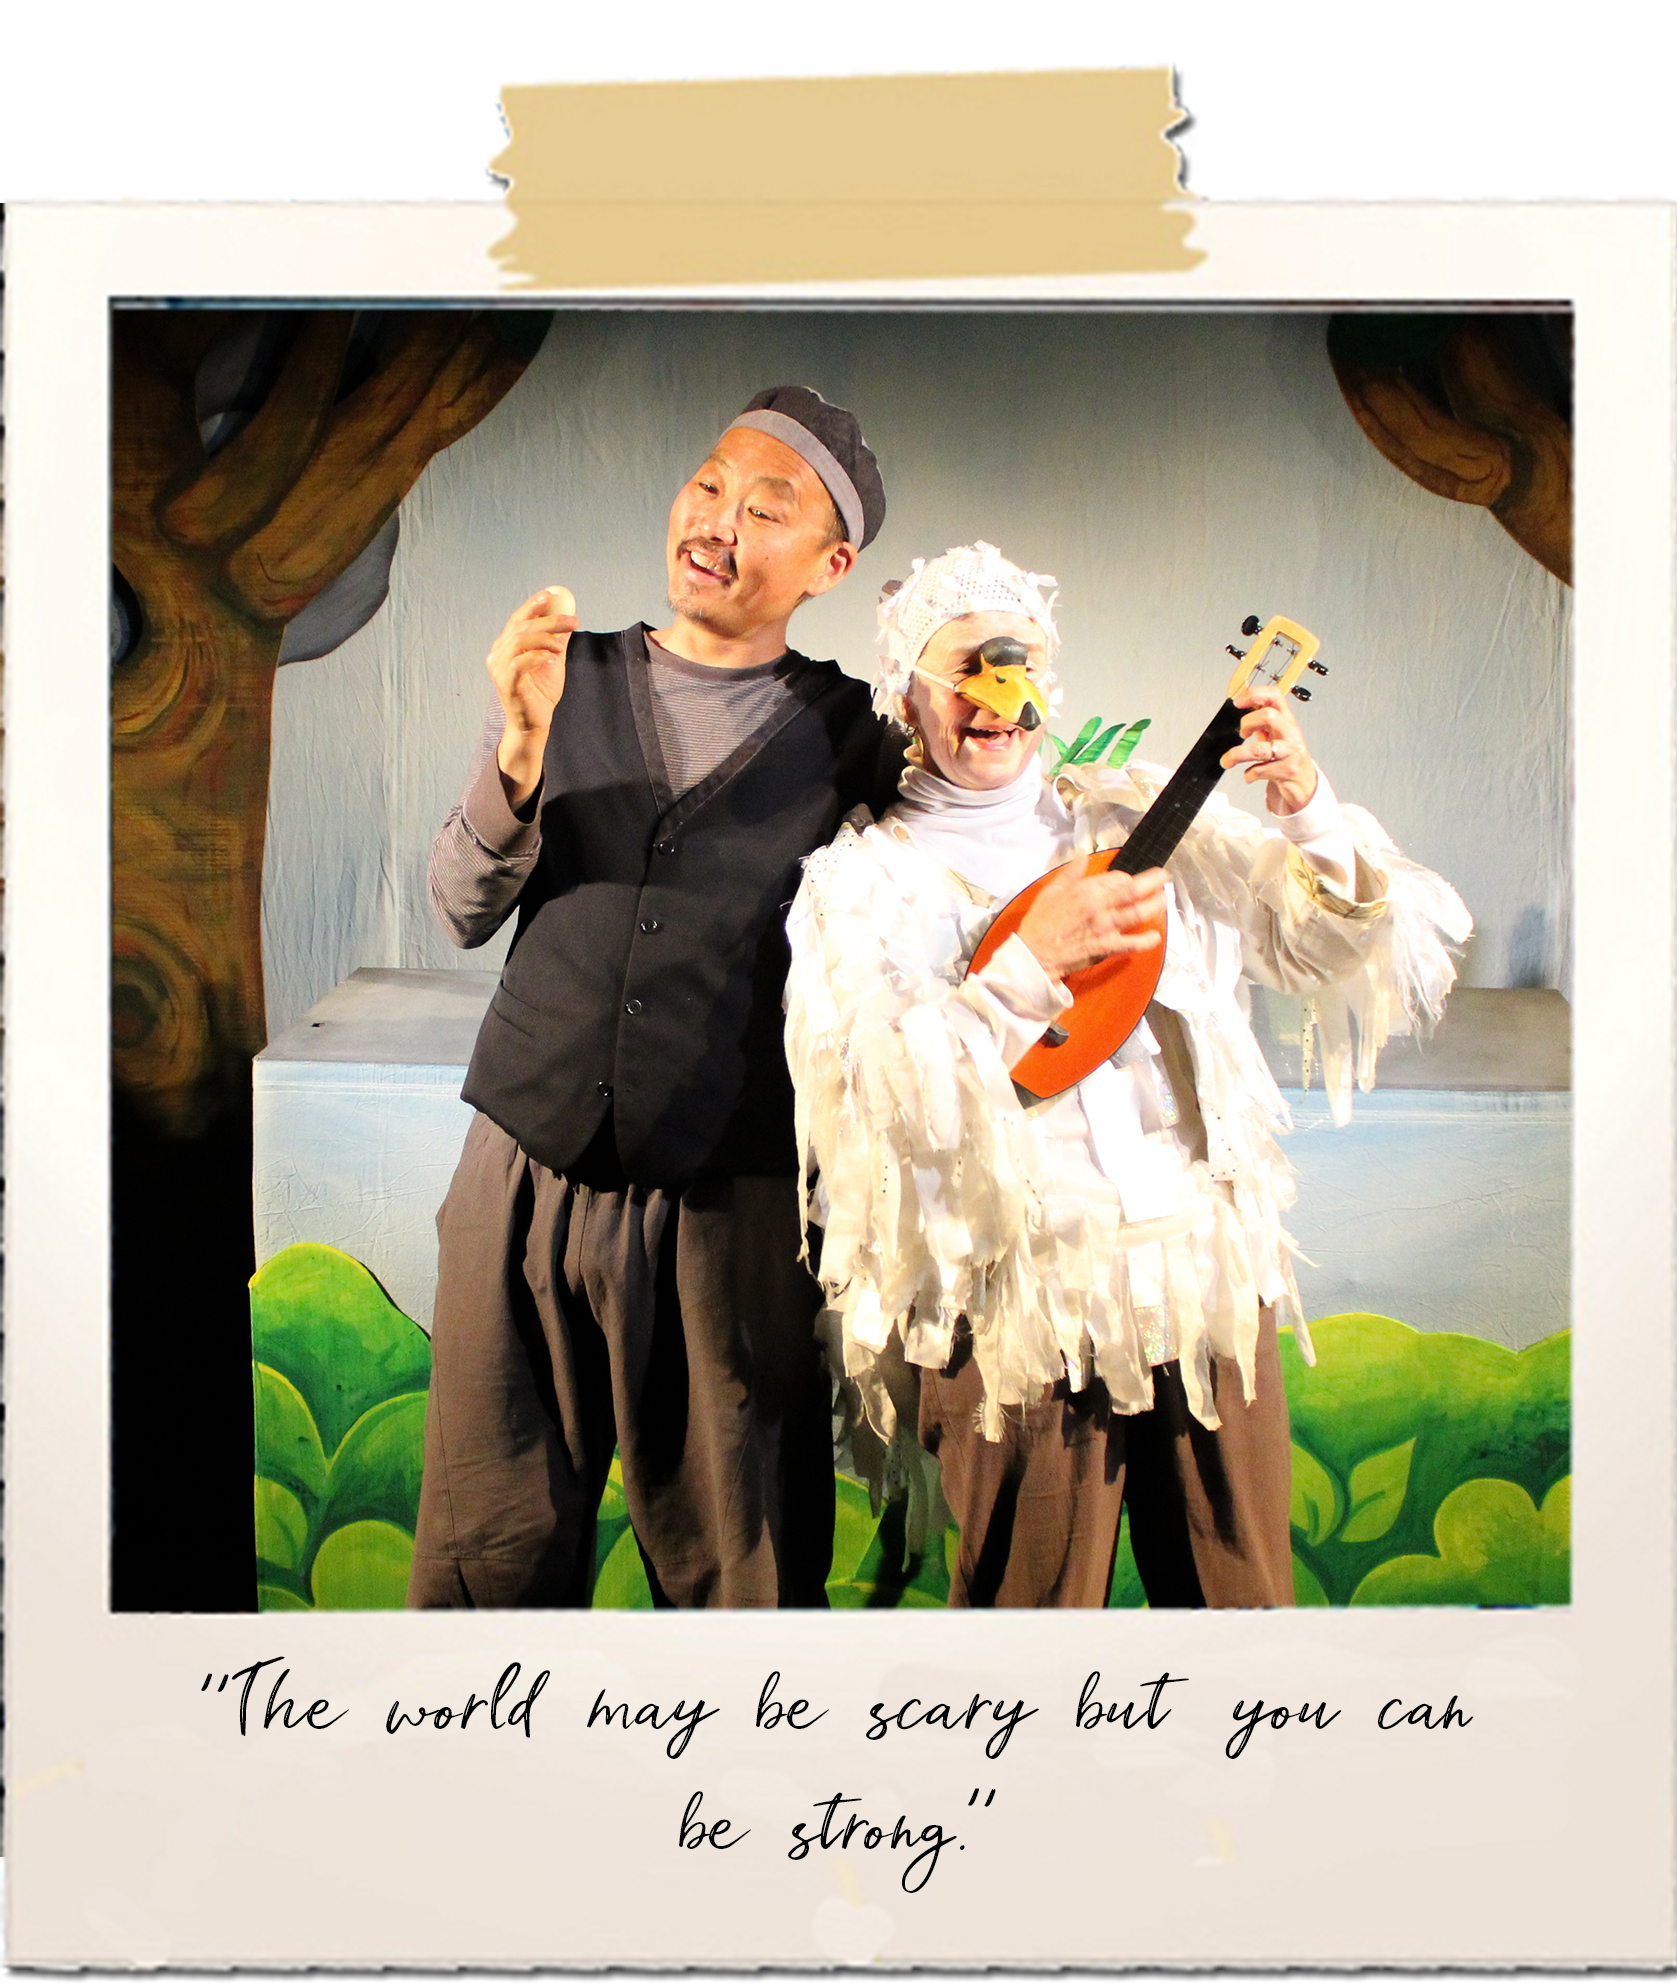 A man and a woman dressed as a swan sing together